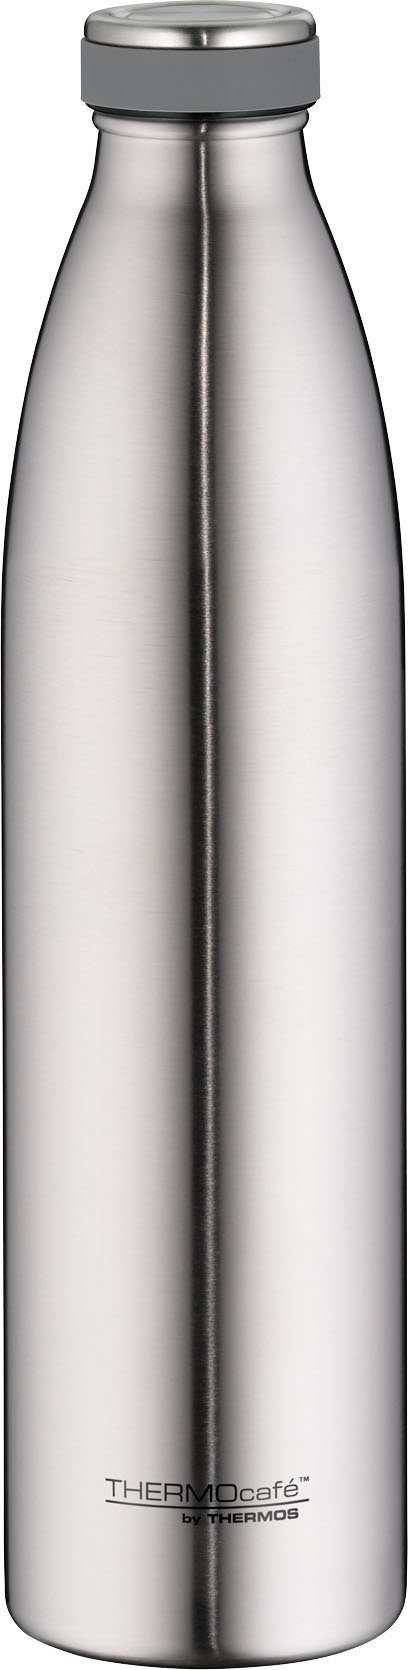 Thermo silberfarben Cafe THERMOS Thermoflasche